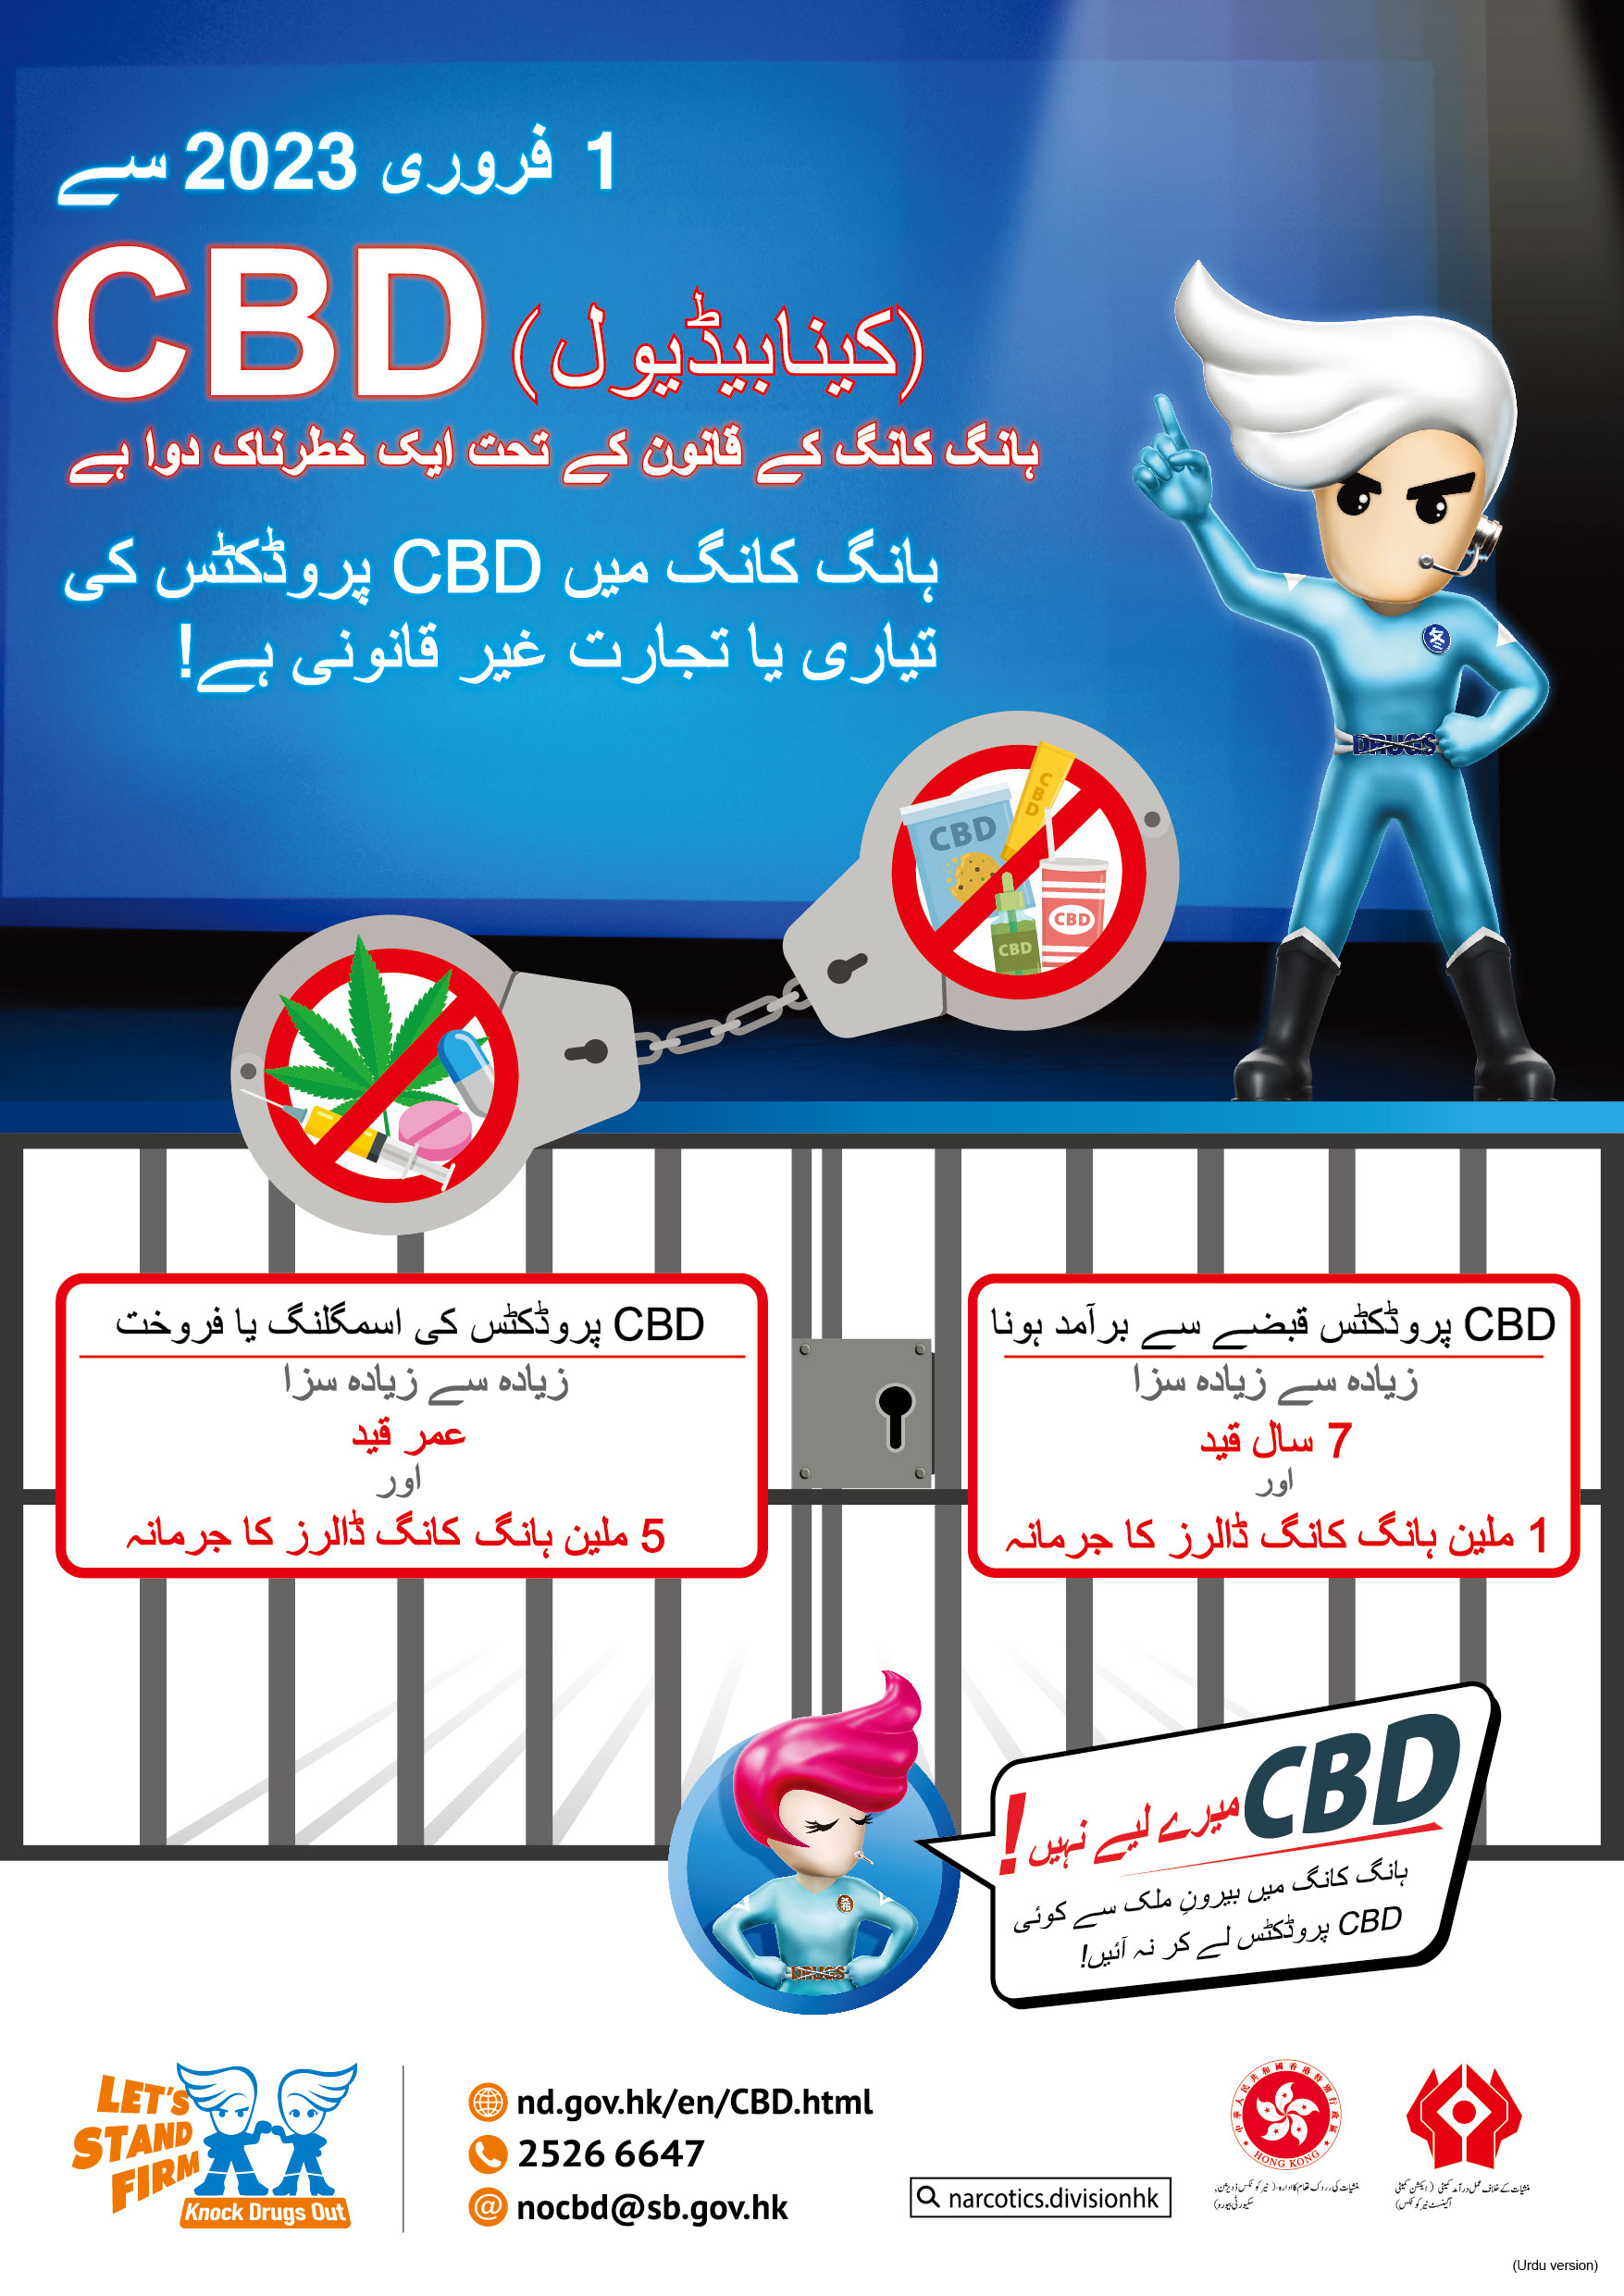 Anti-drug poster “CBD, Not for me! (Commencement of Law)” – Urdu version